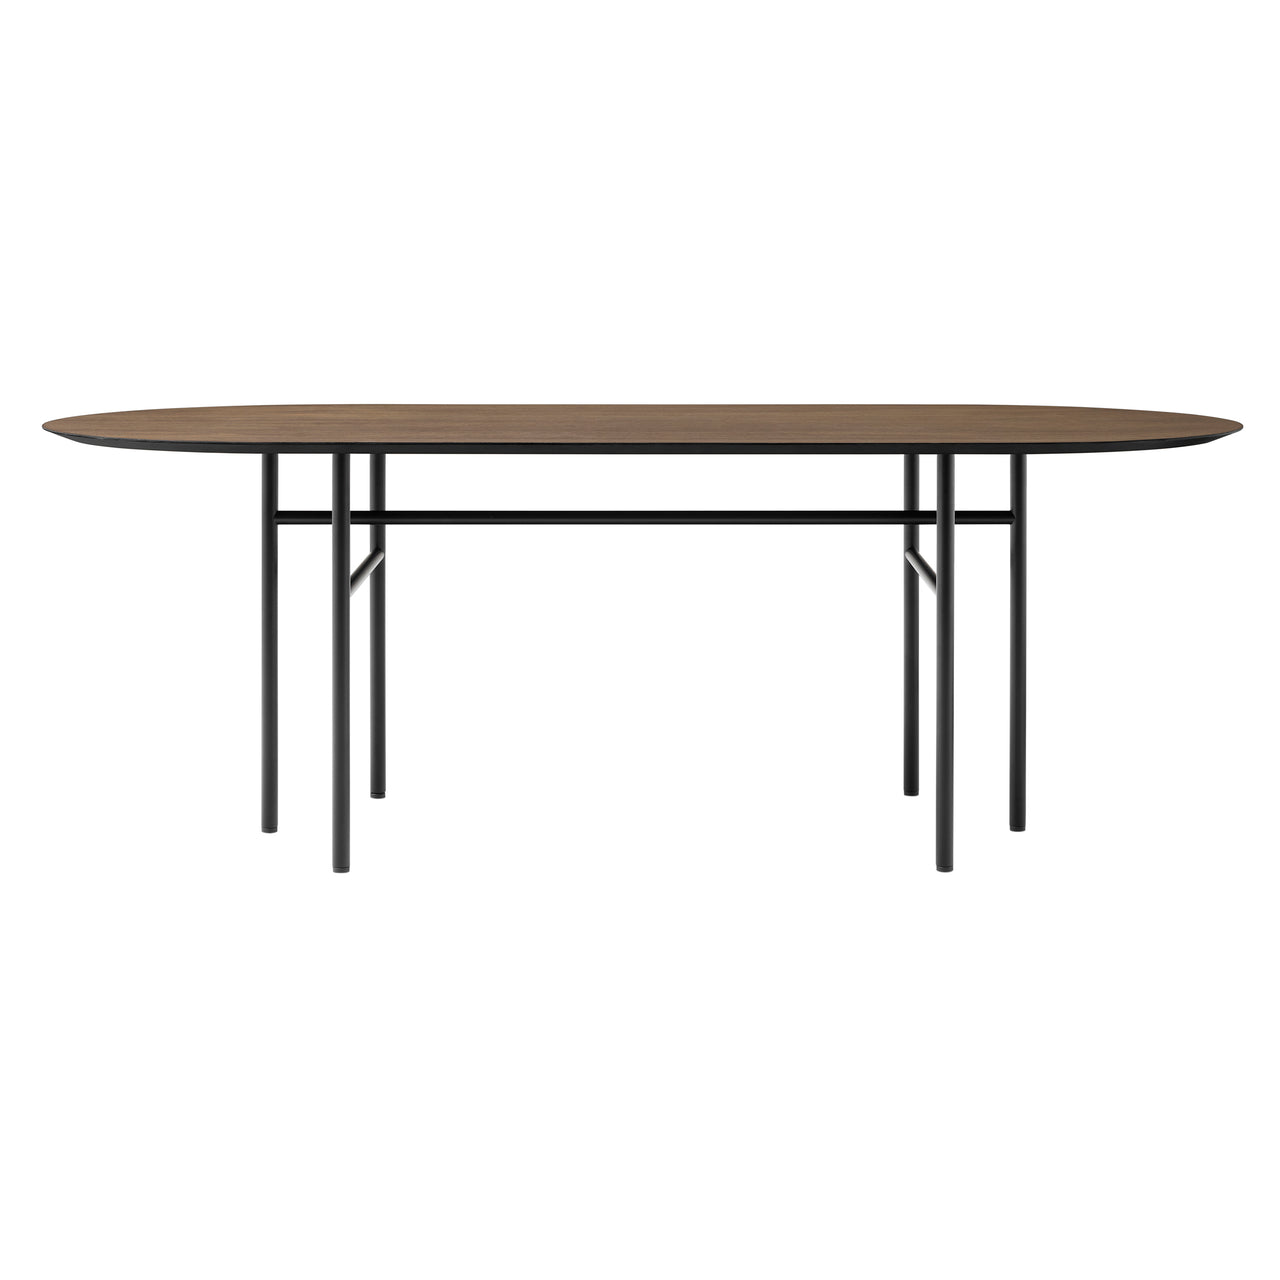 Snaregade Oval Table: Dark Stained Oak